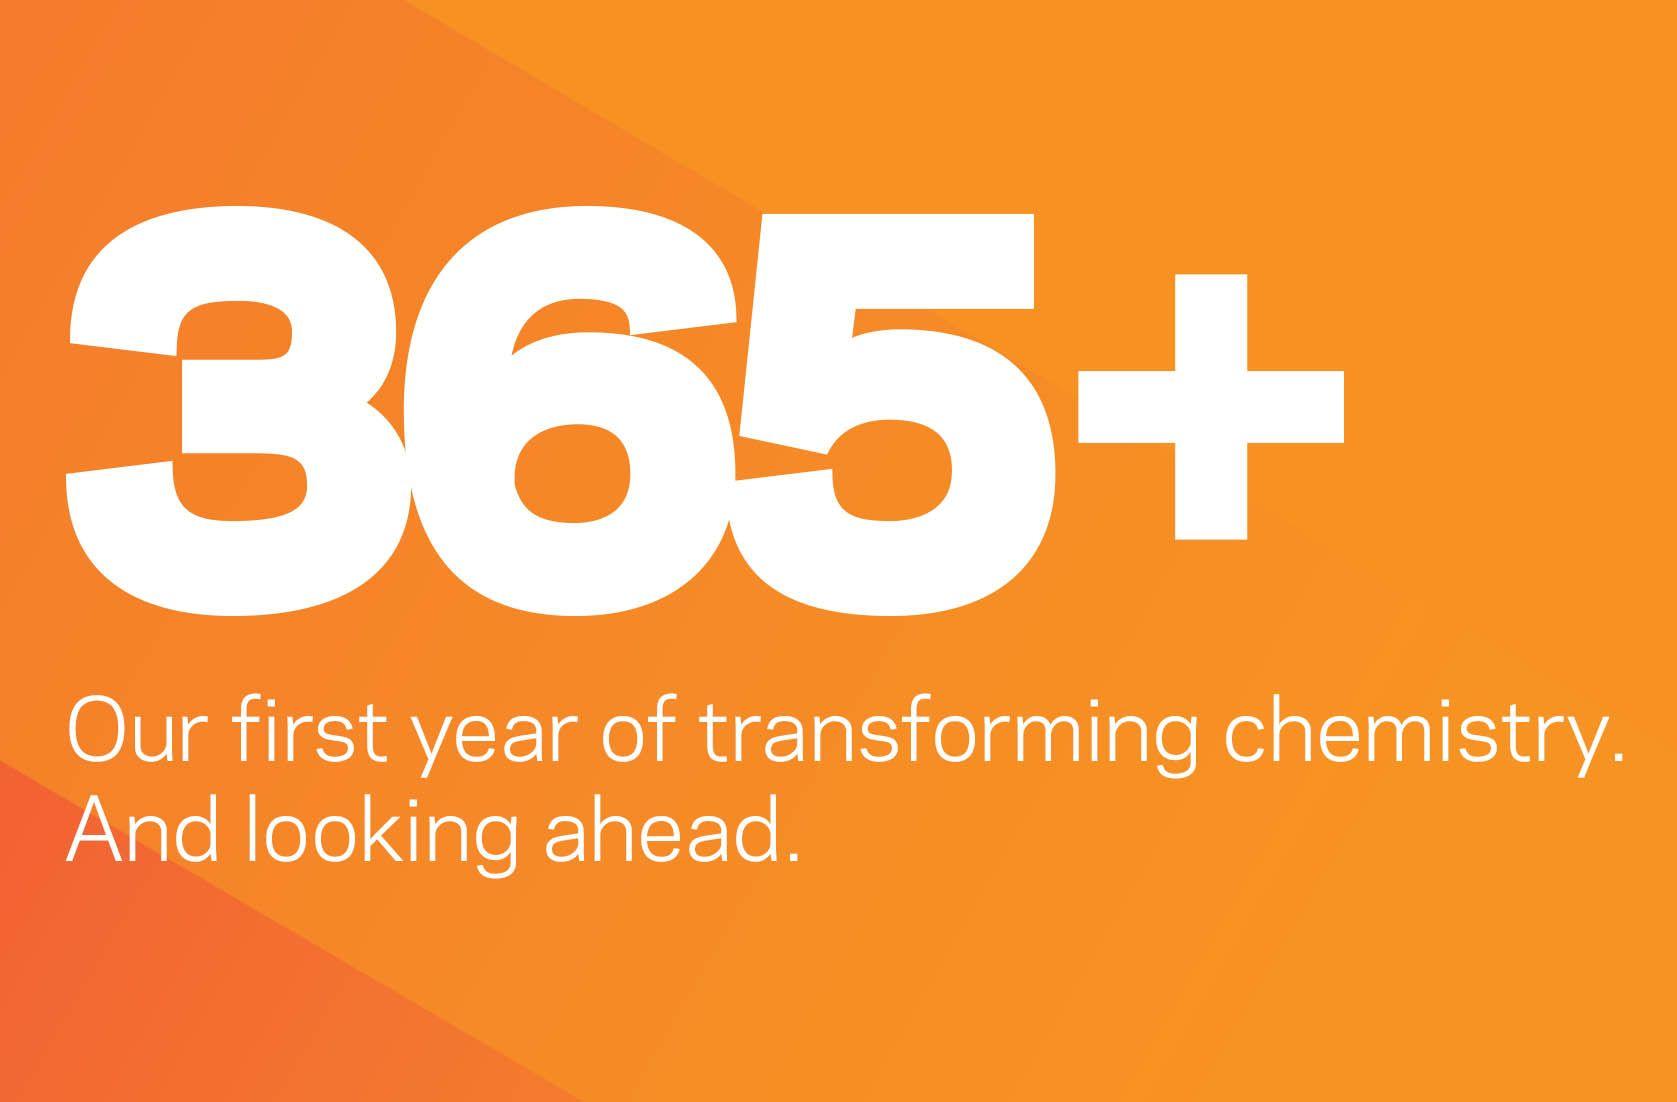 Chemours Logo - Chemours First Year | The Chemours Company